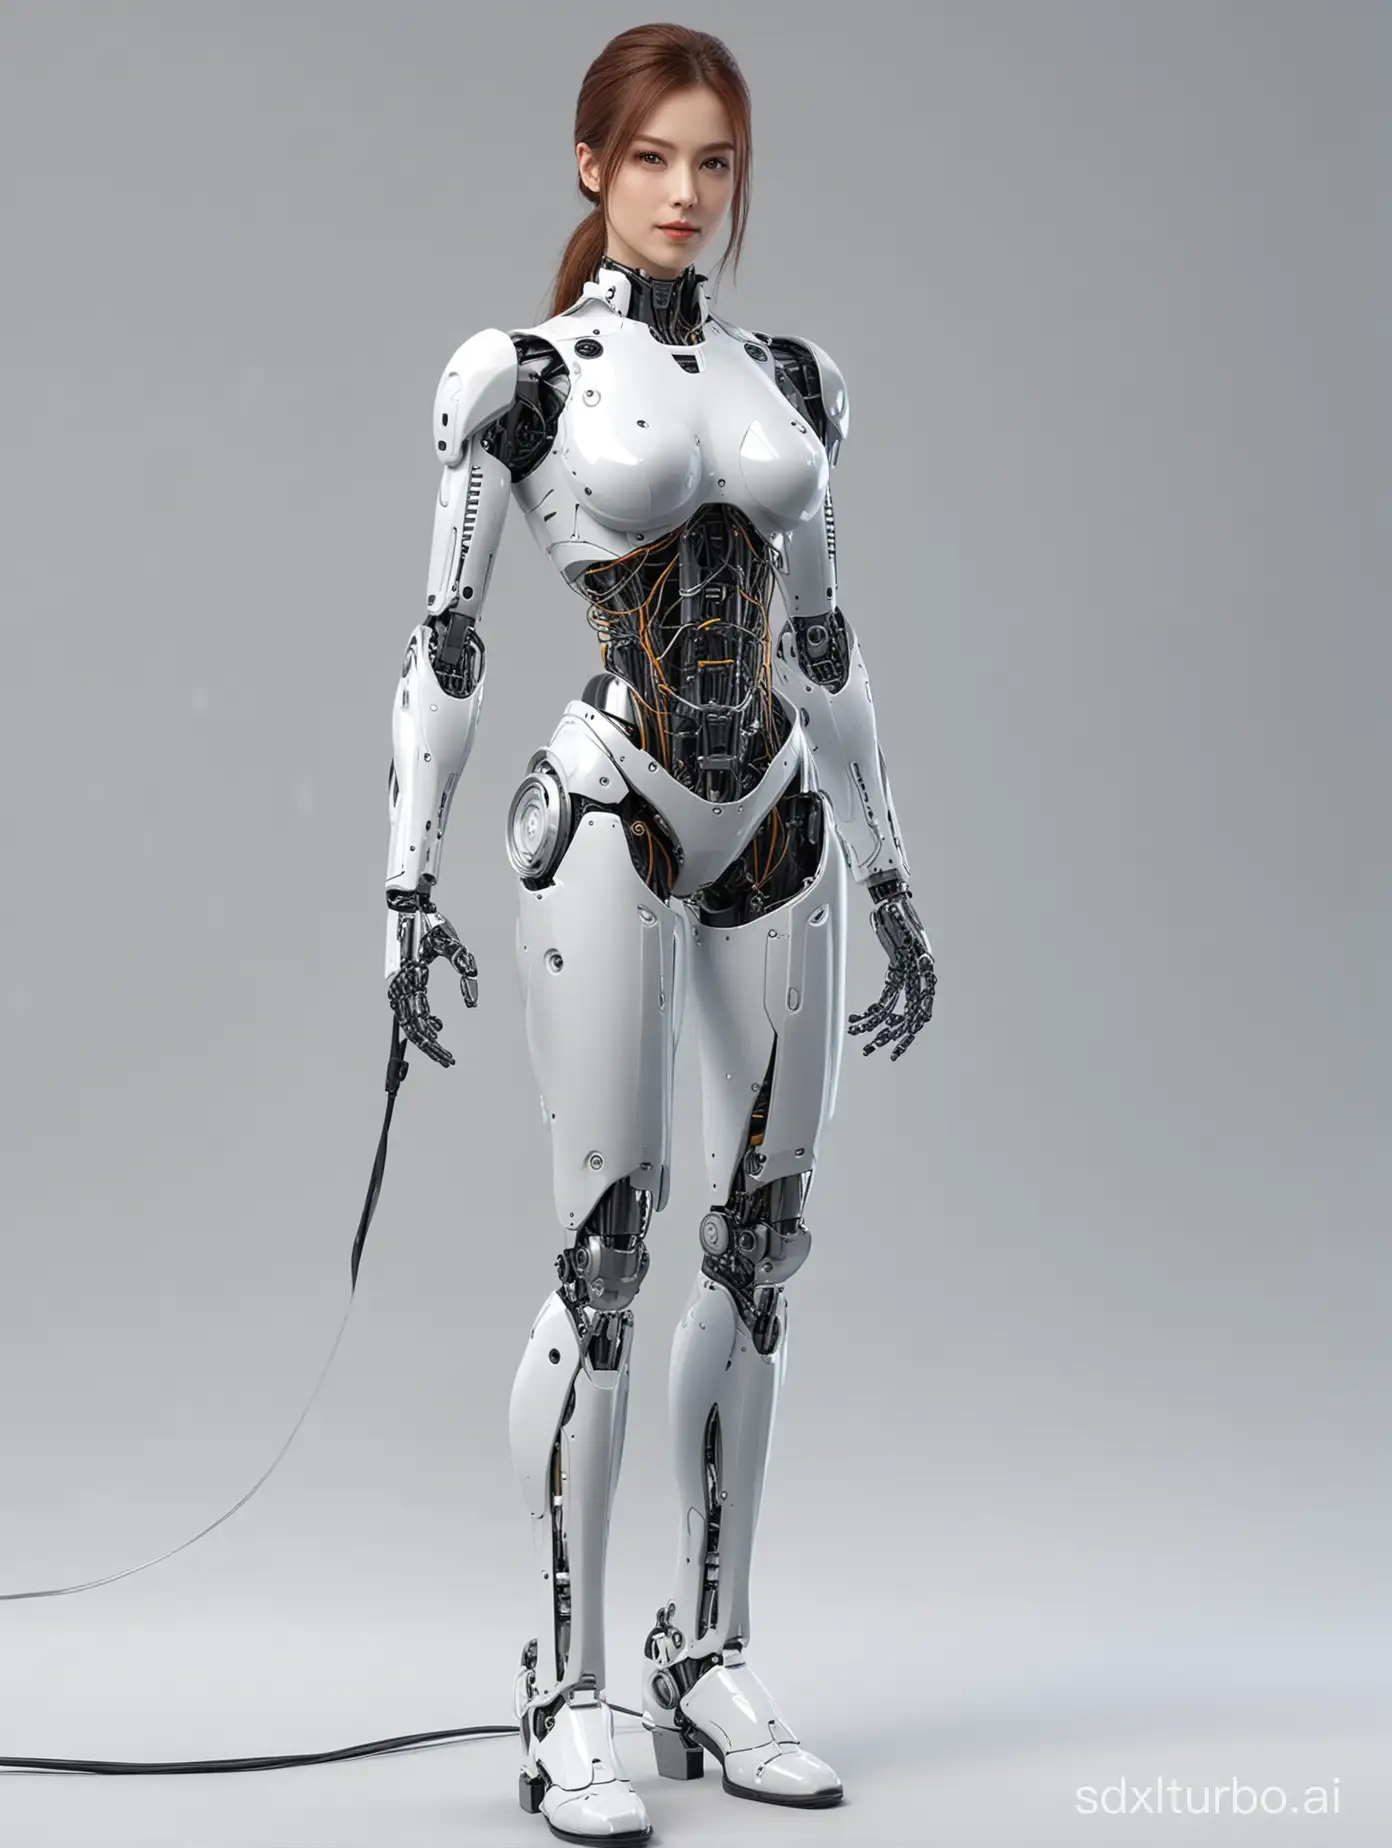 Suspend the half-bodied female robot for charging